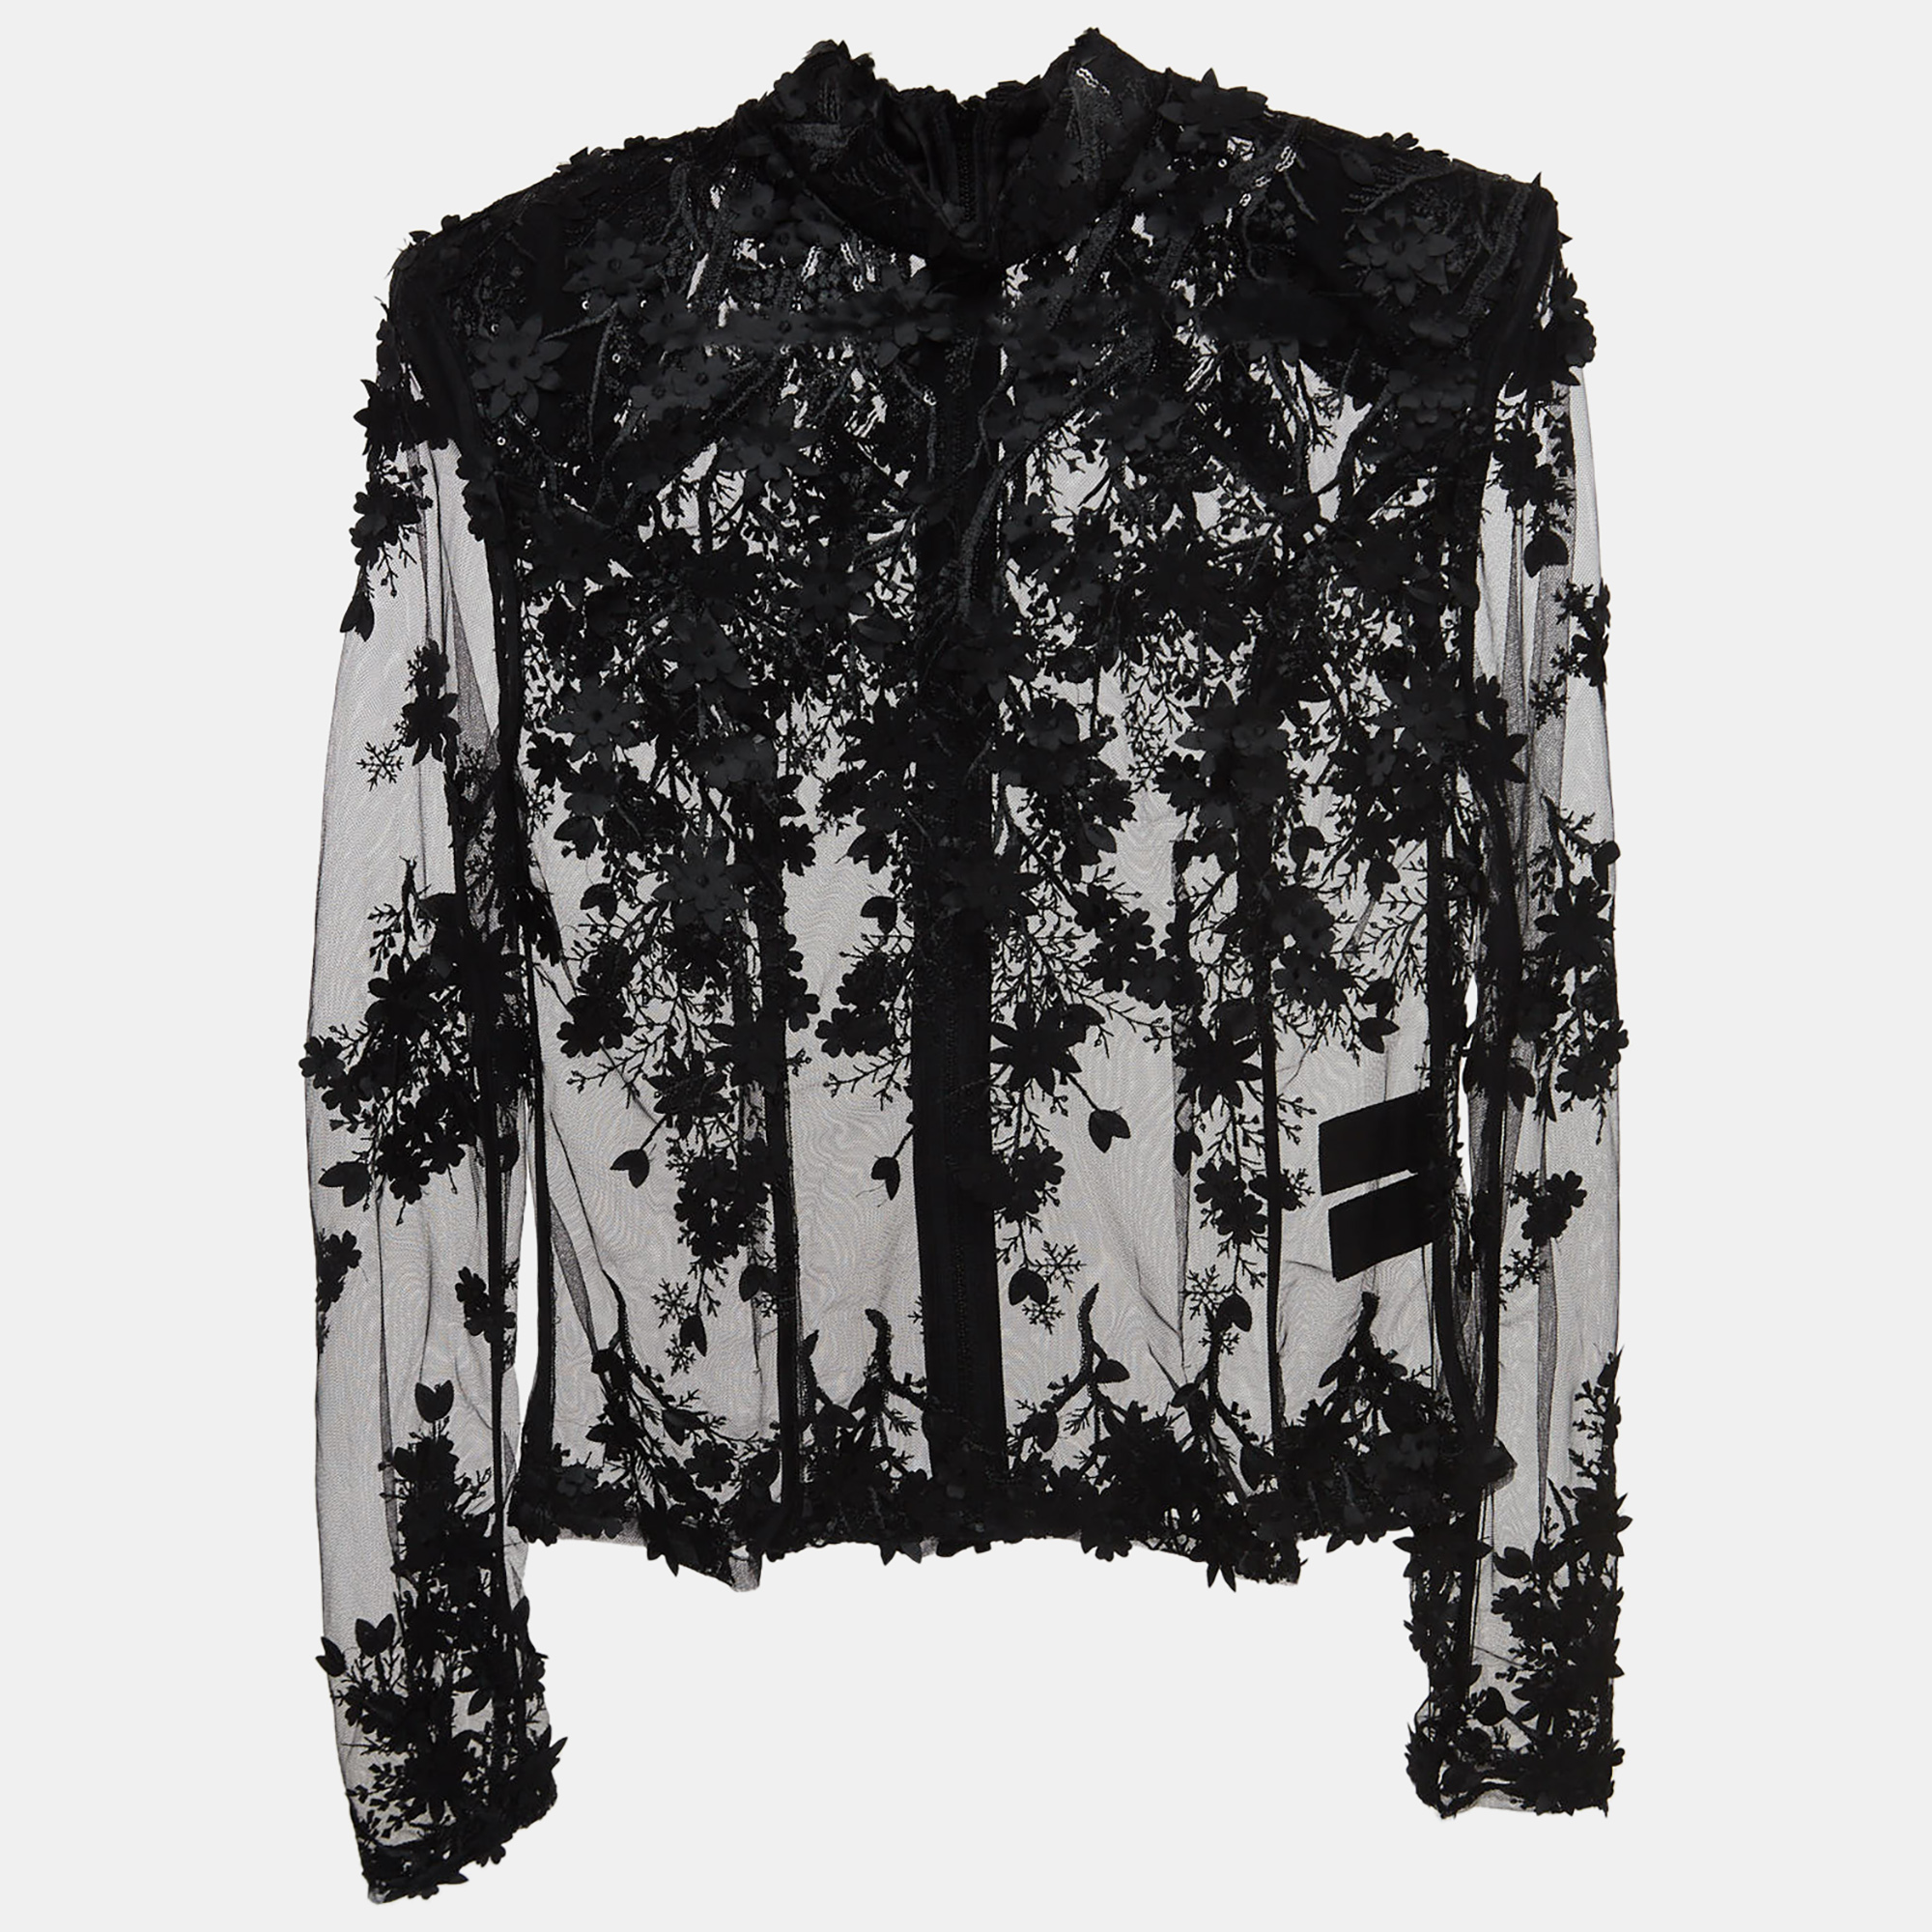 

Zhivago Black Embroidered Mesh High Neck Sheer Top